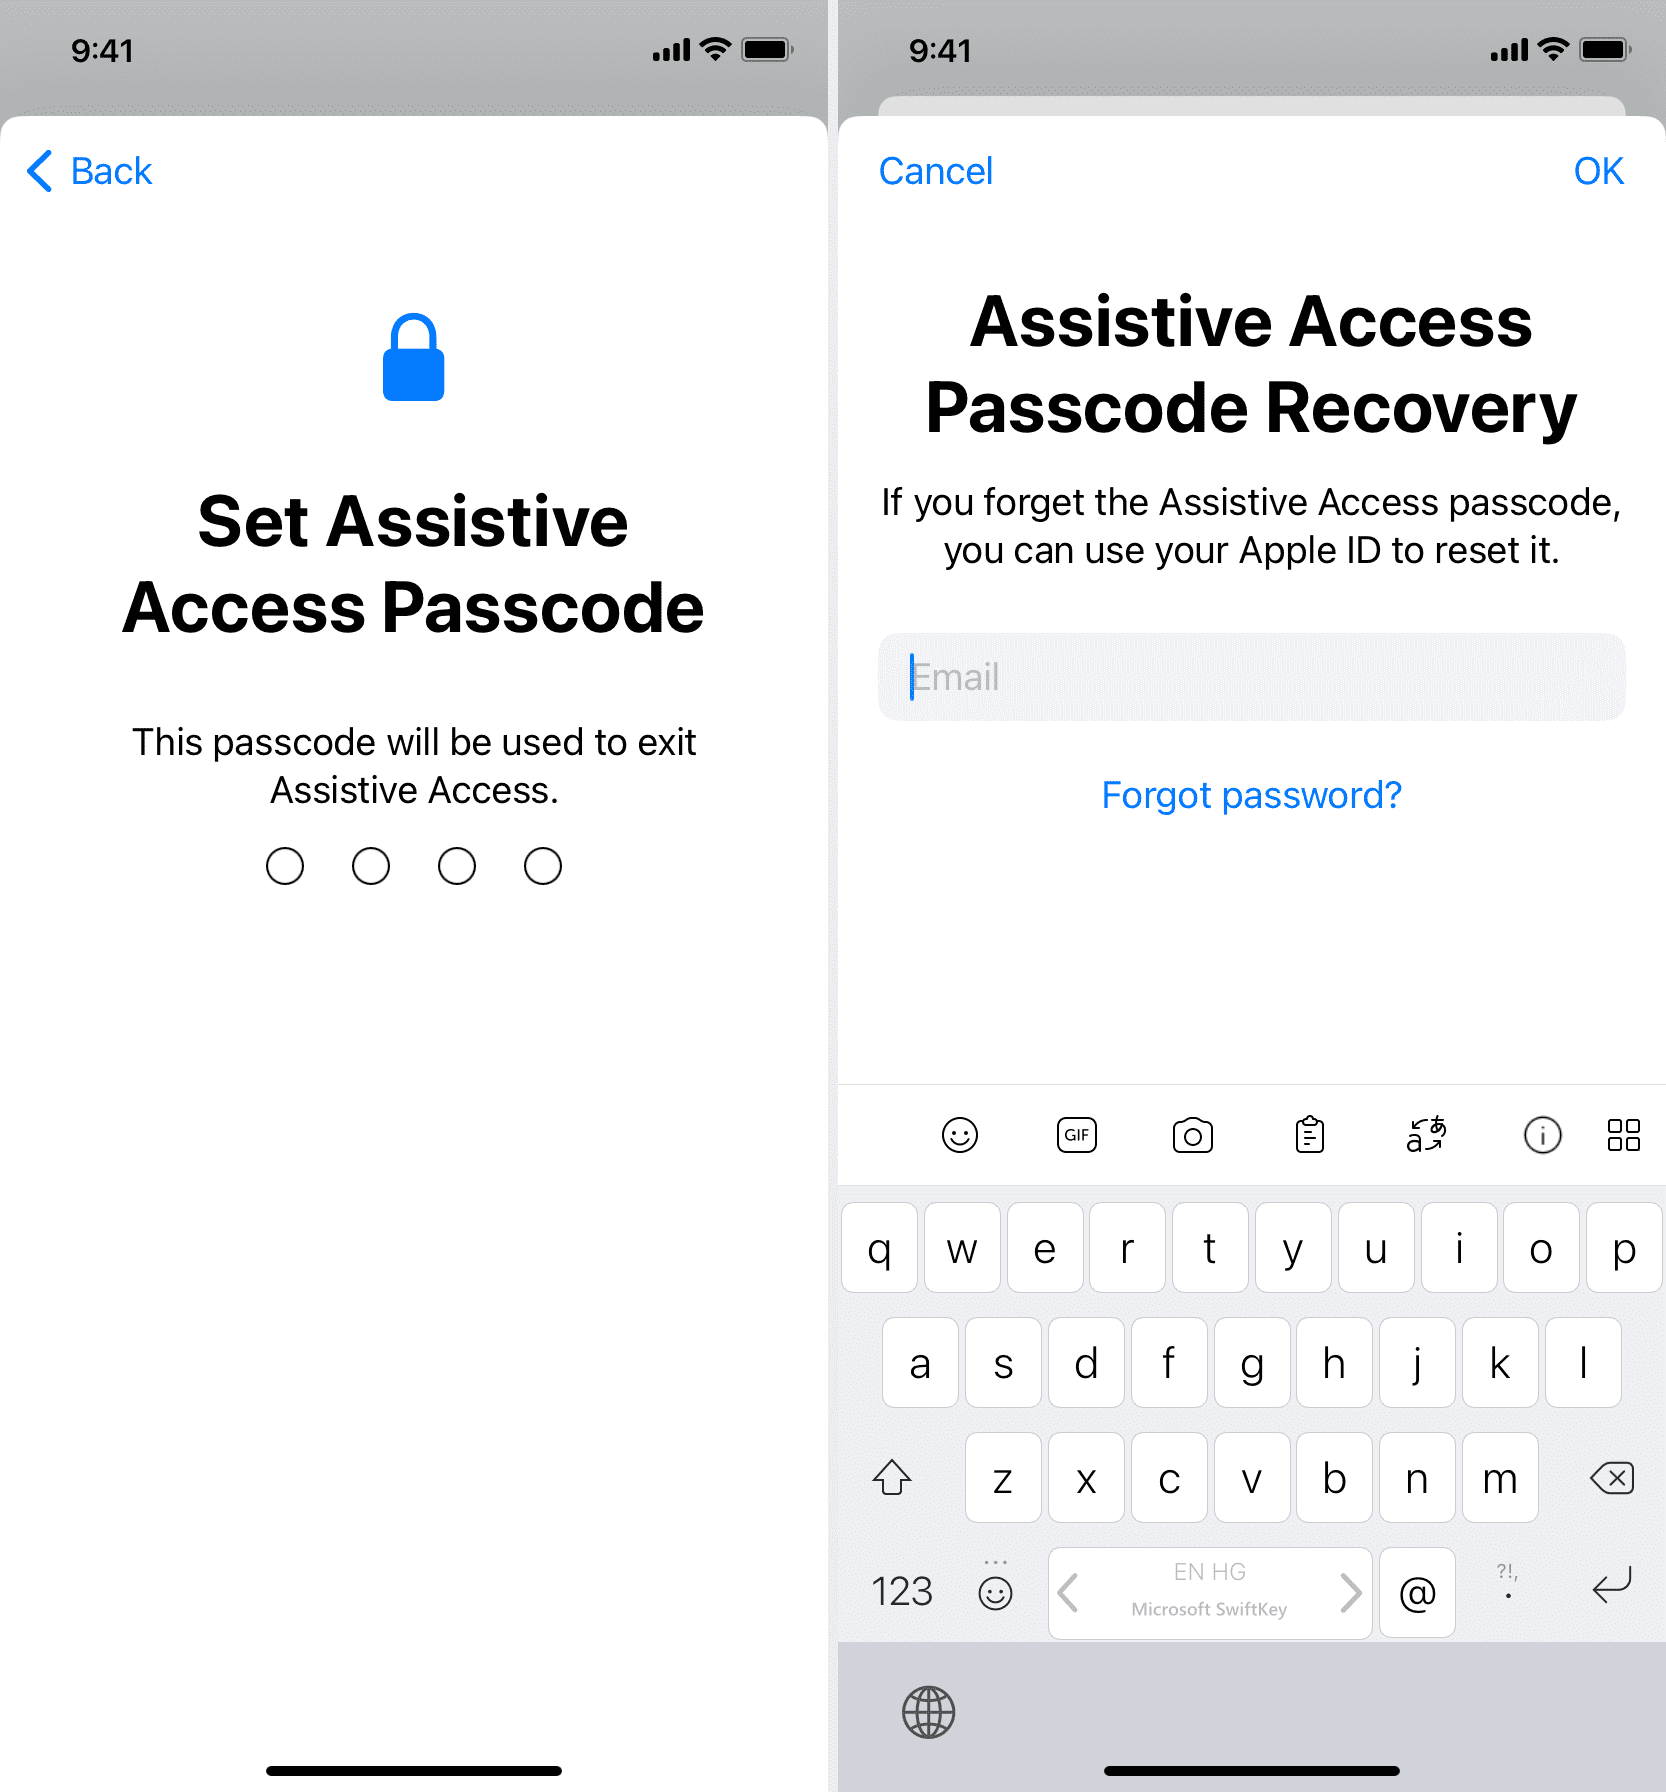 Assistive Access Passcode Recovery on iPhone